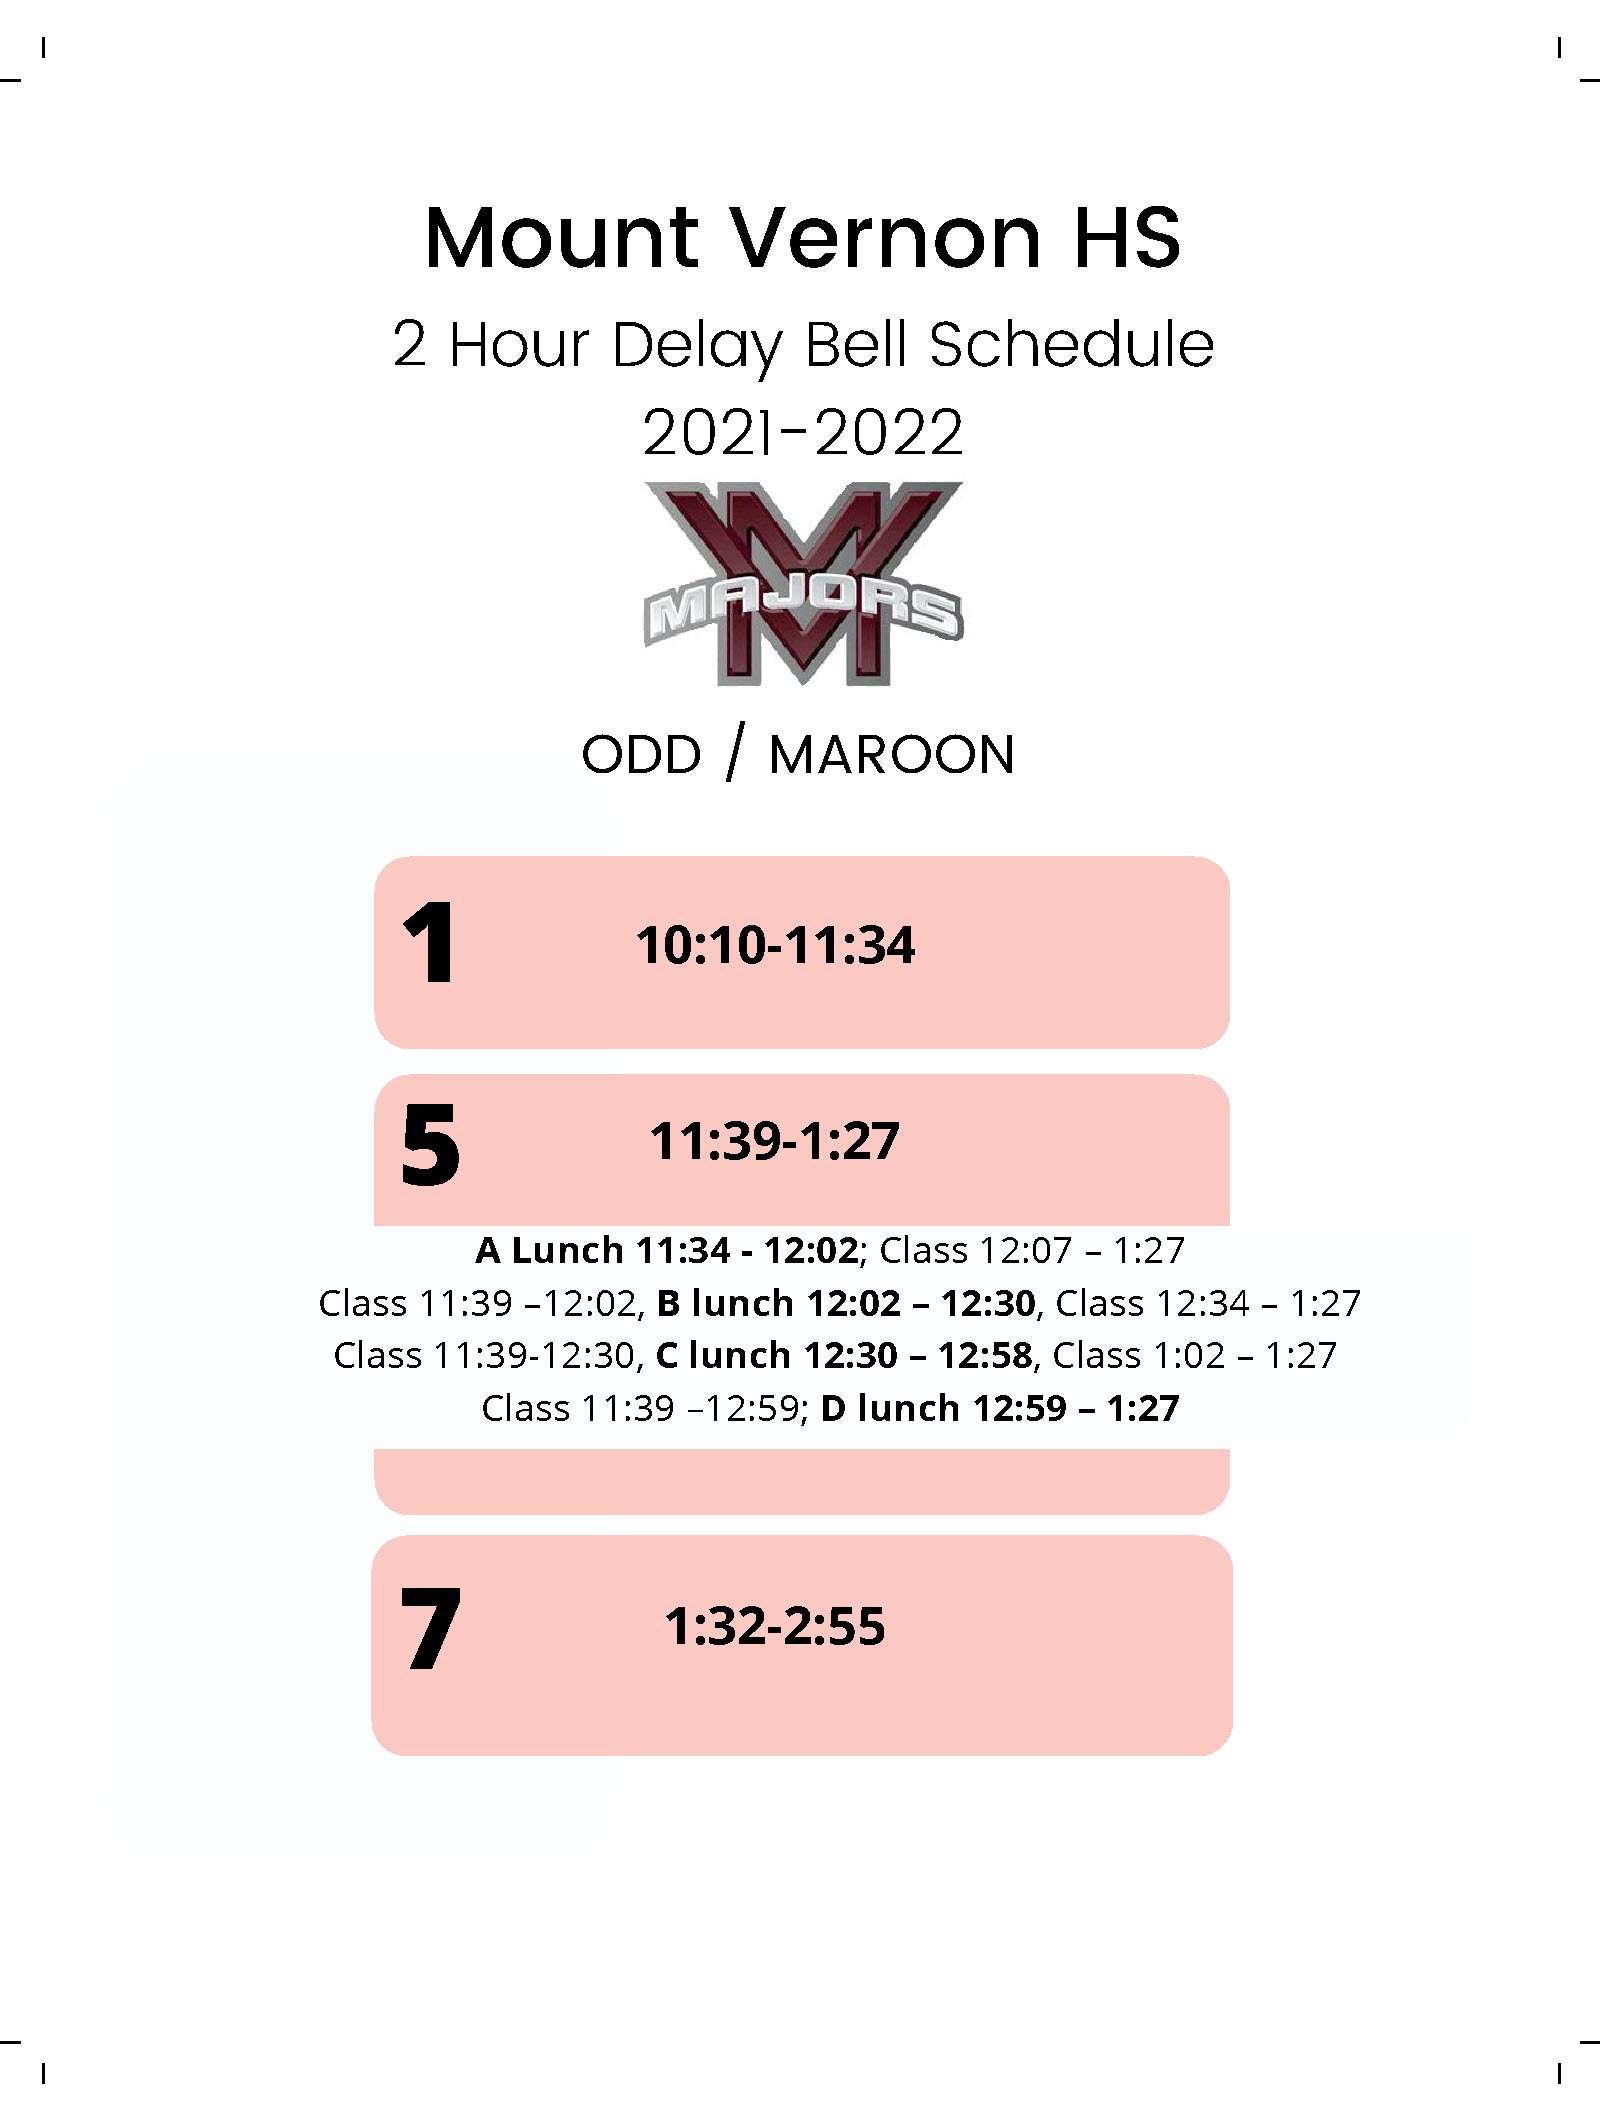 Image of the Two Hour Delayed Opening Schedule - Odd